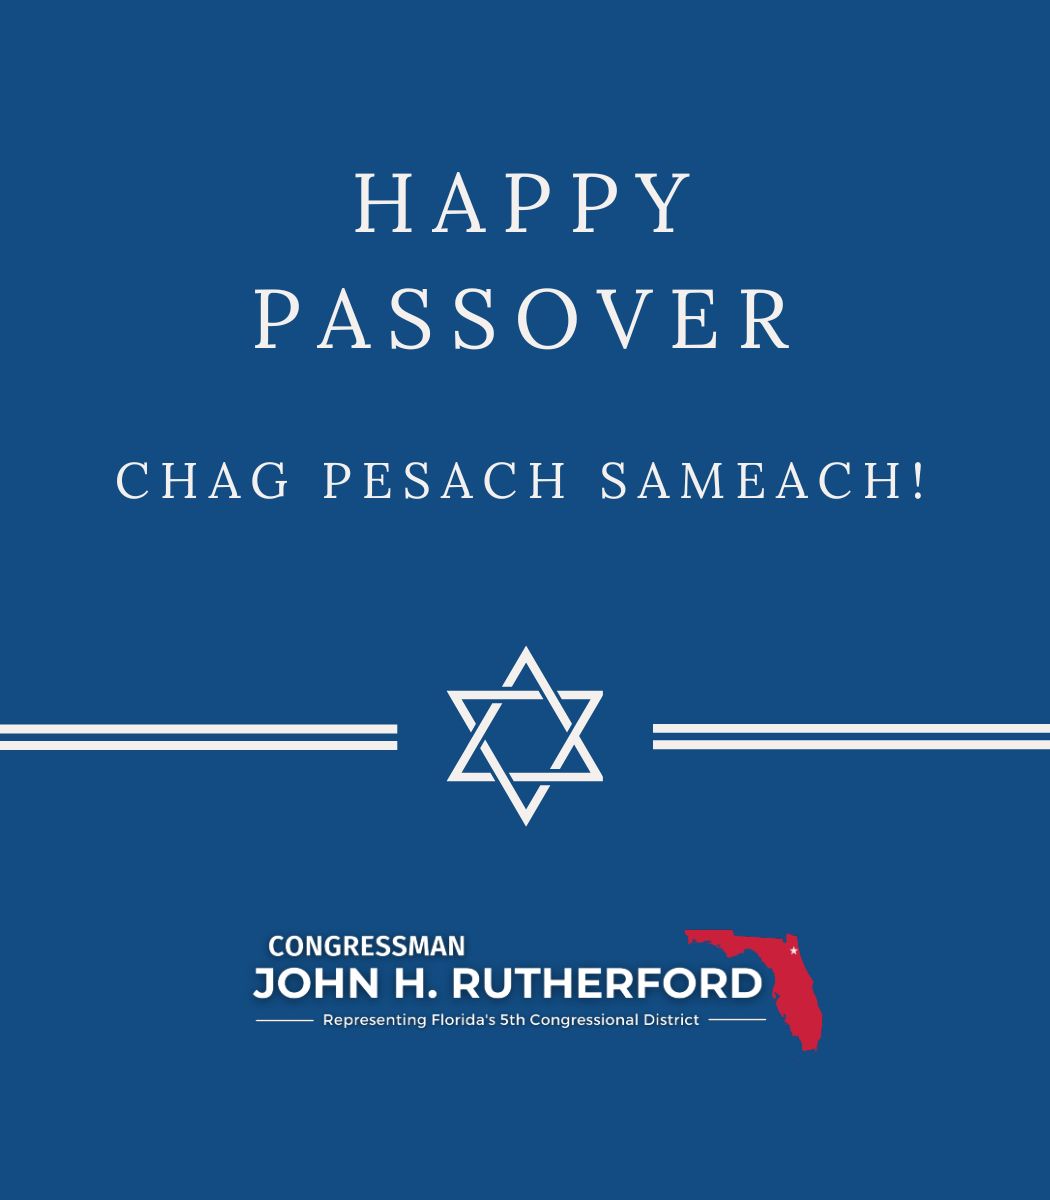 Wishing a peaceful and happy Passover to all my Jewish brothers and sisters. We must continue to support our Jewish communities at home and abroad as we work towards peace. Chag Pesach Sameach, to all who celebrate!